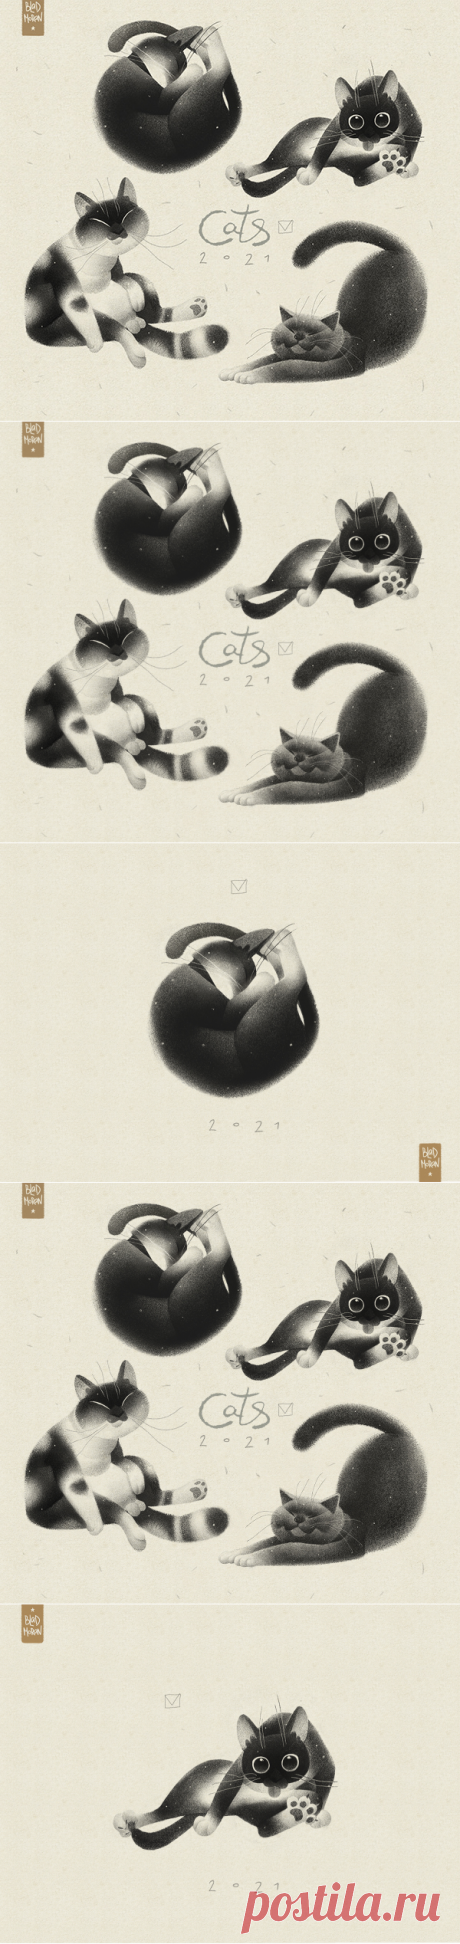 Cats on Behance